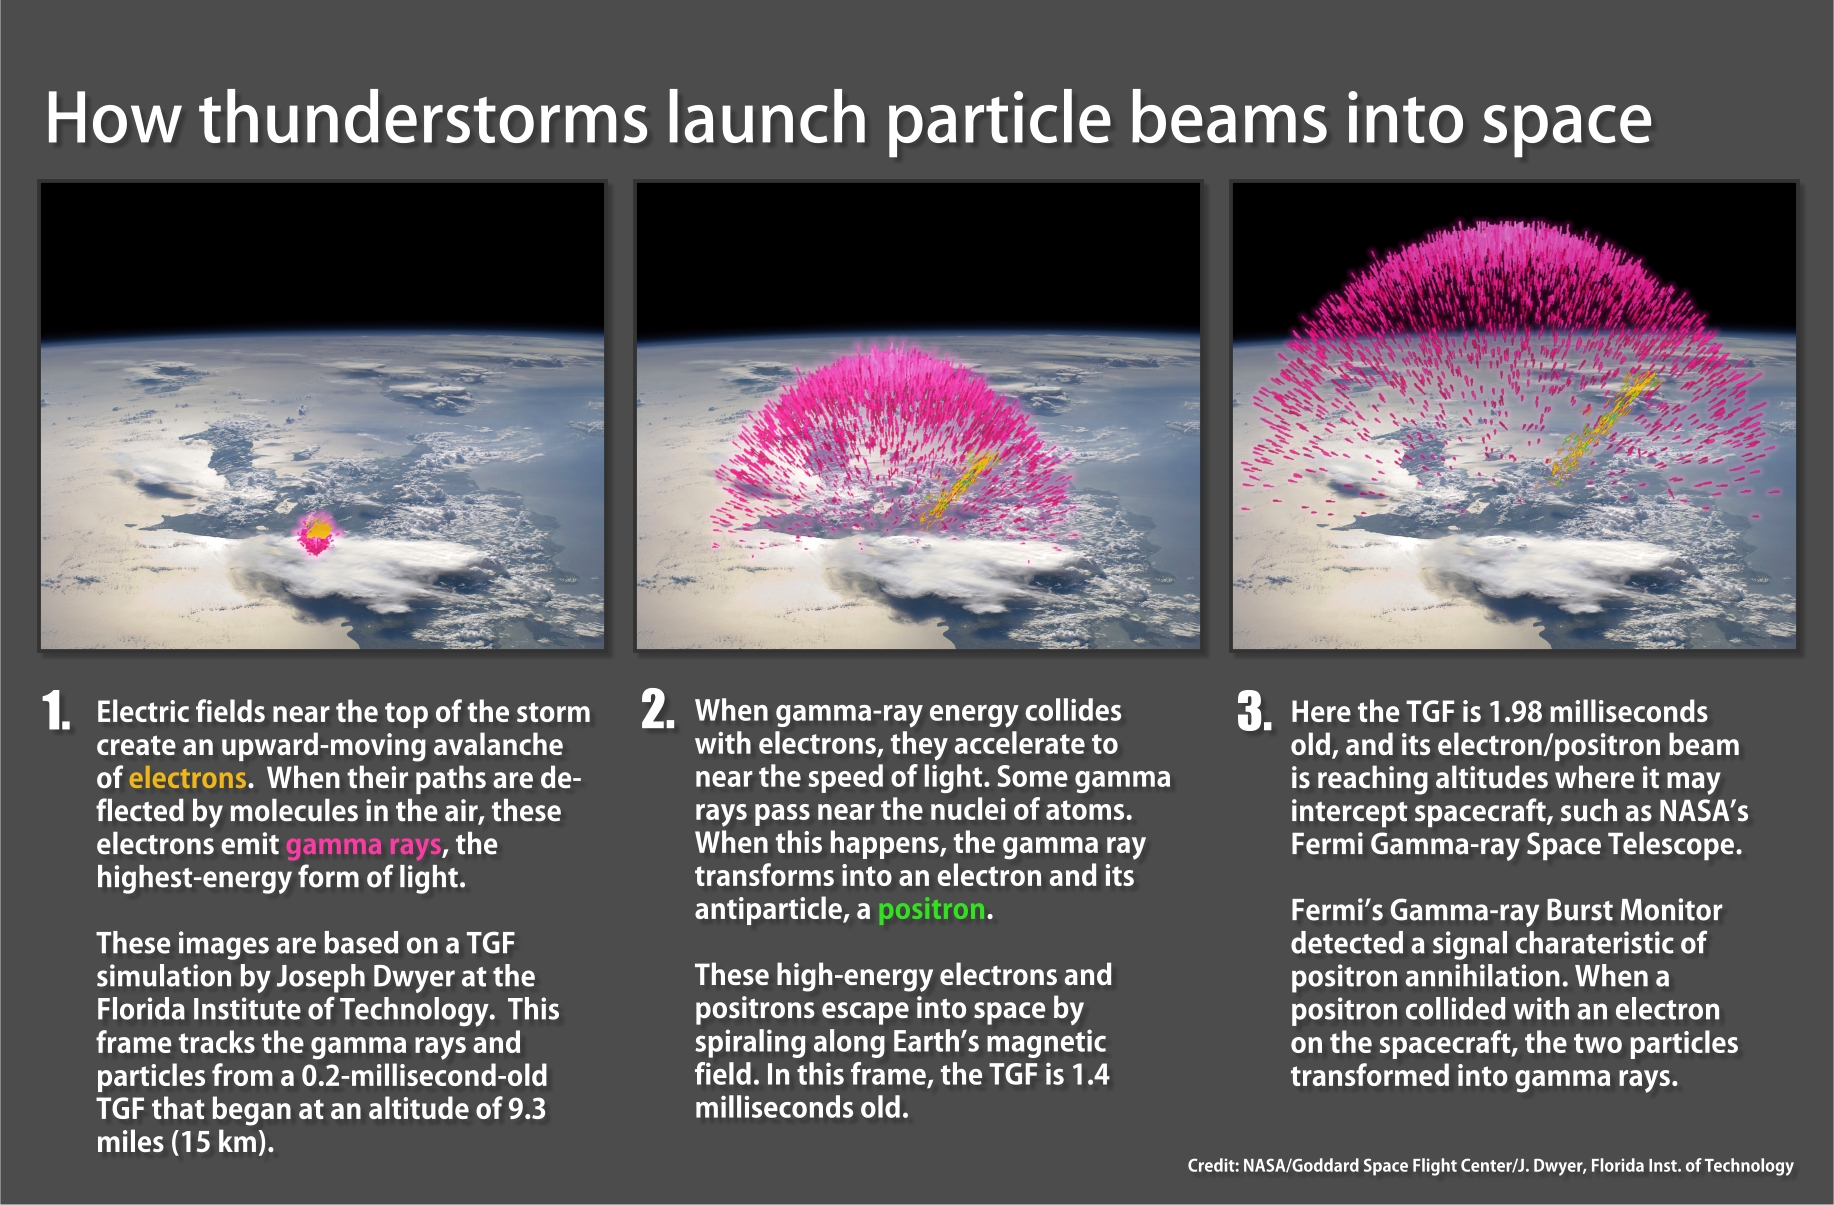 thumbnail image of PDF showing how thunderstorms launch particle beams into space